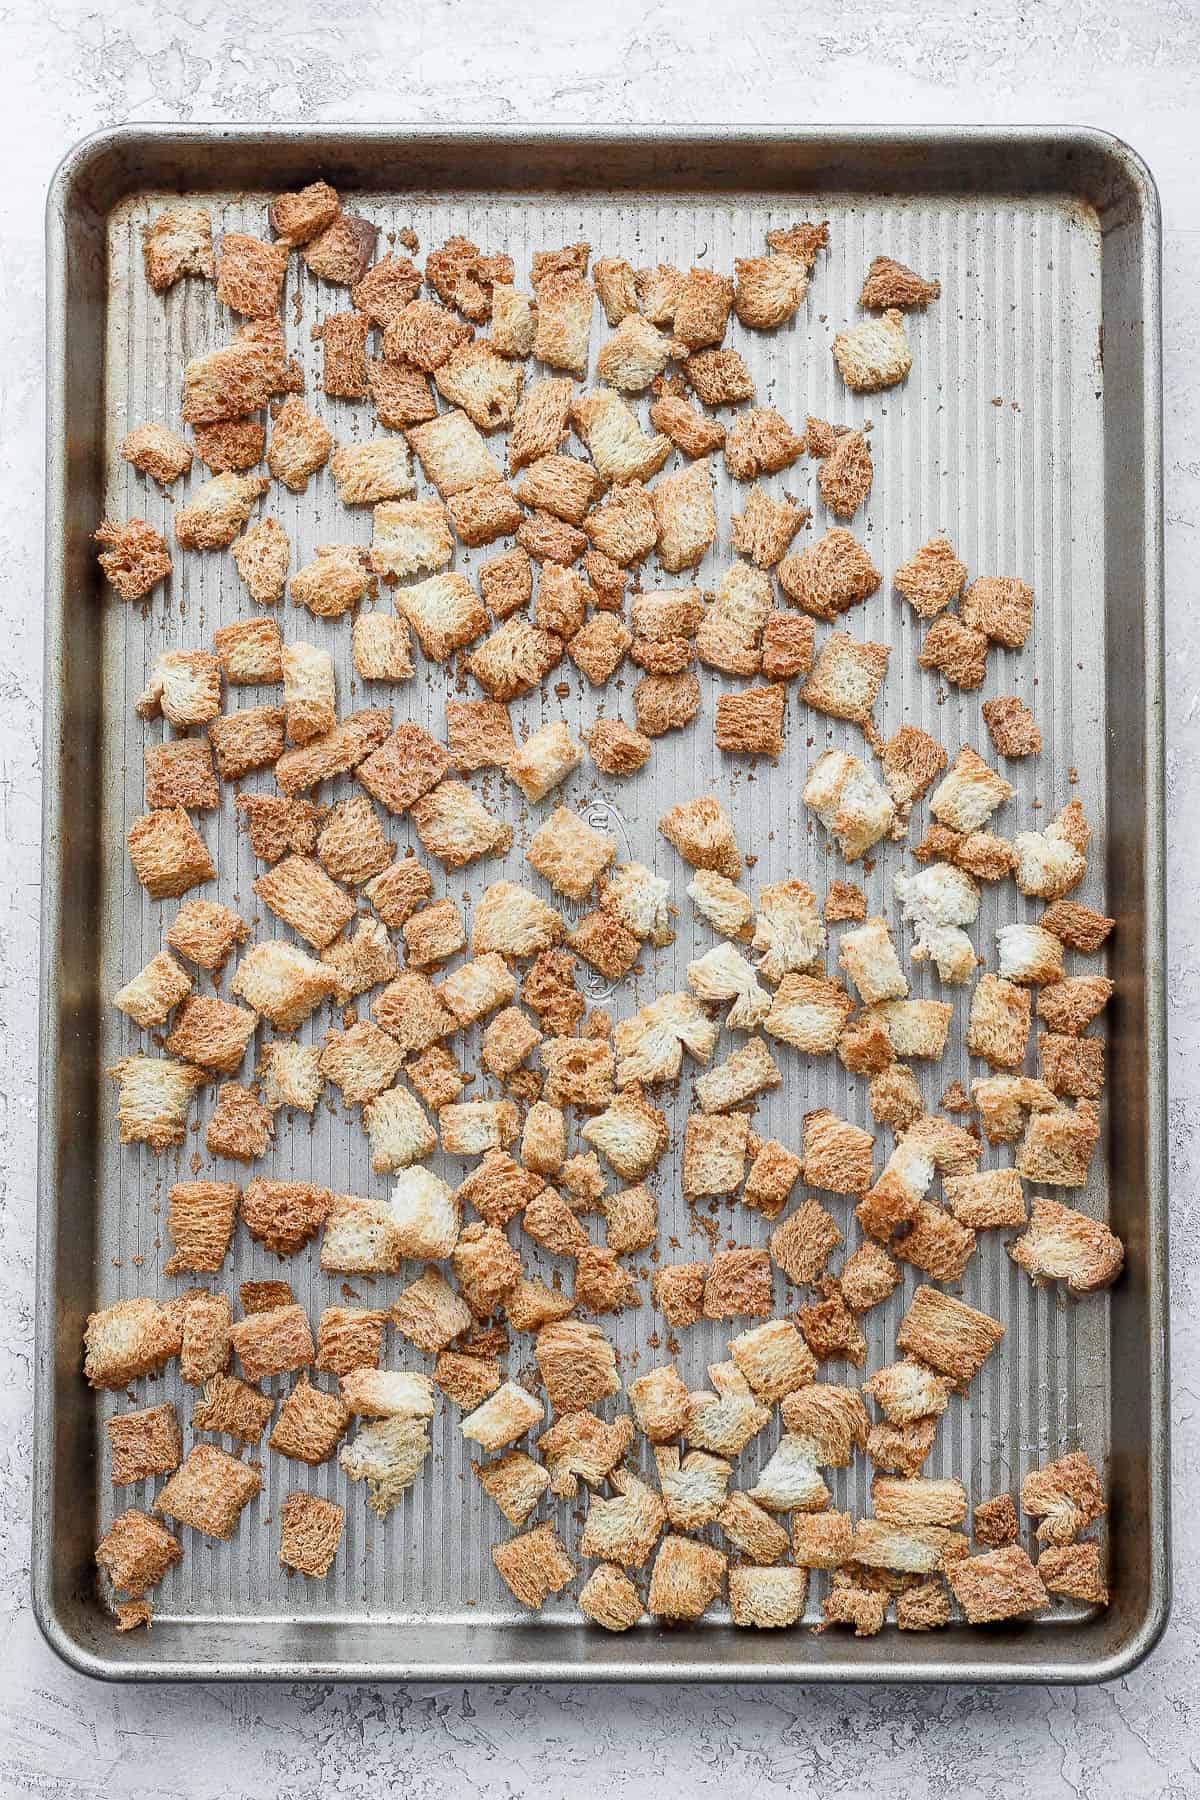 Toasted cubed bread on large baking dish